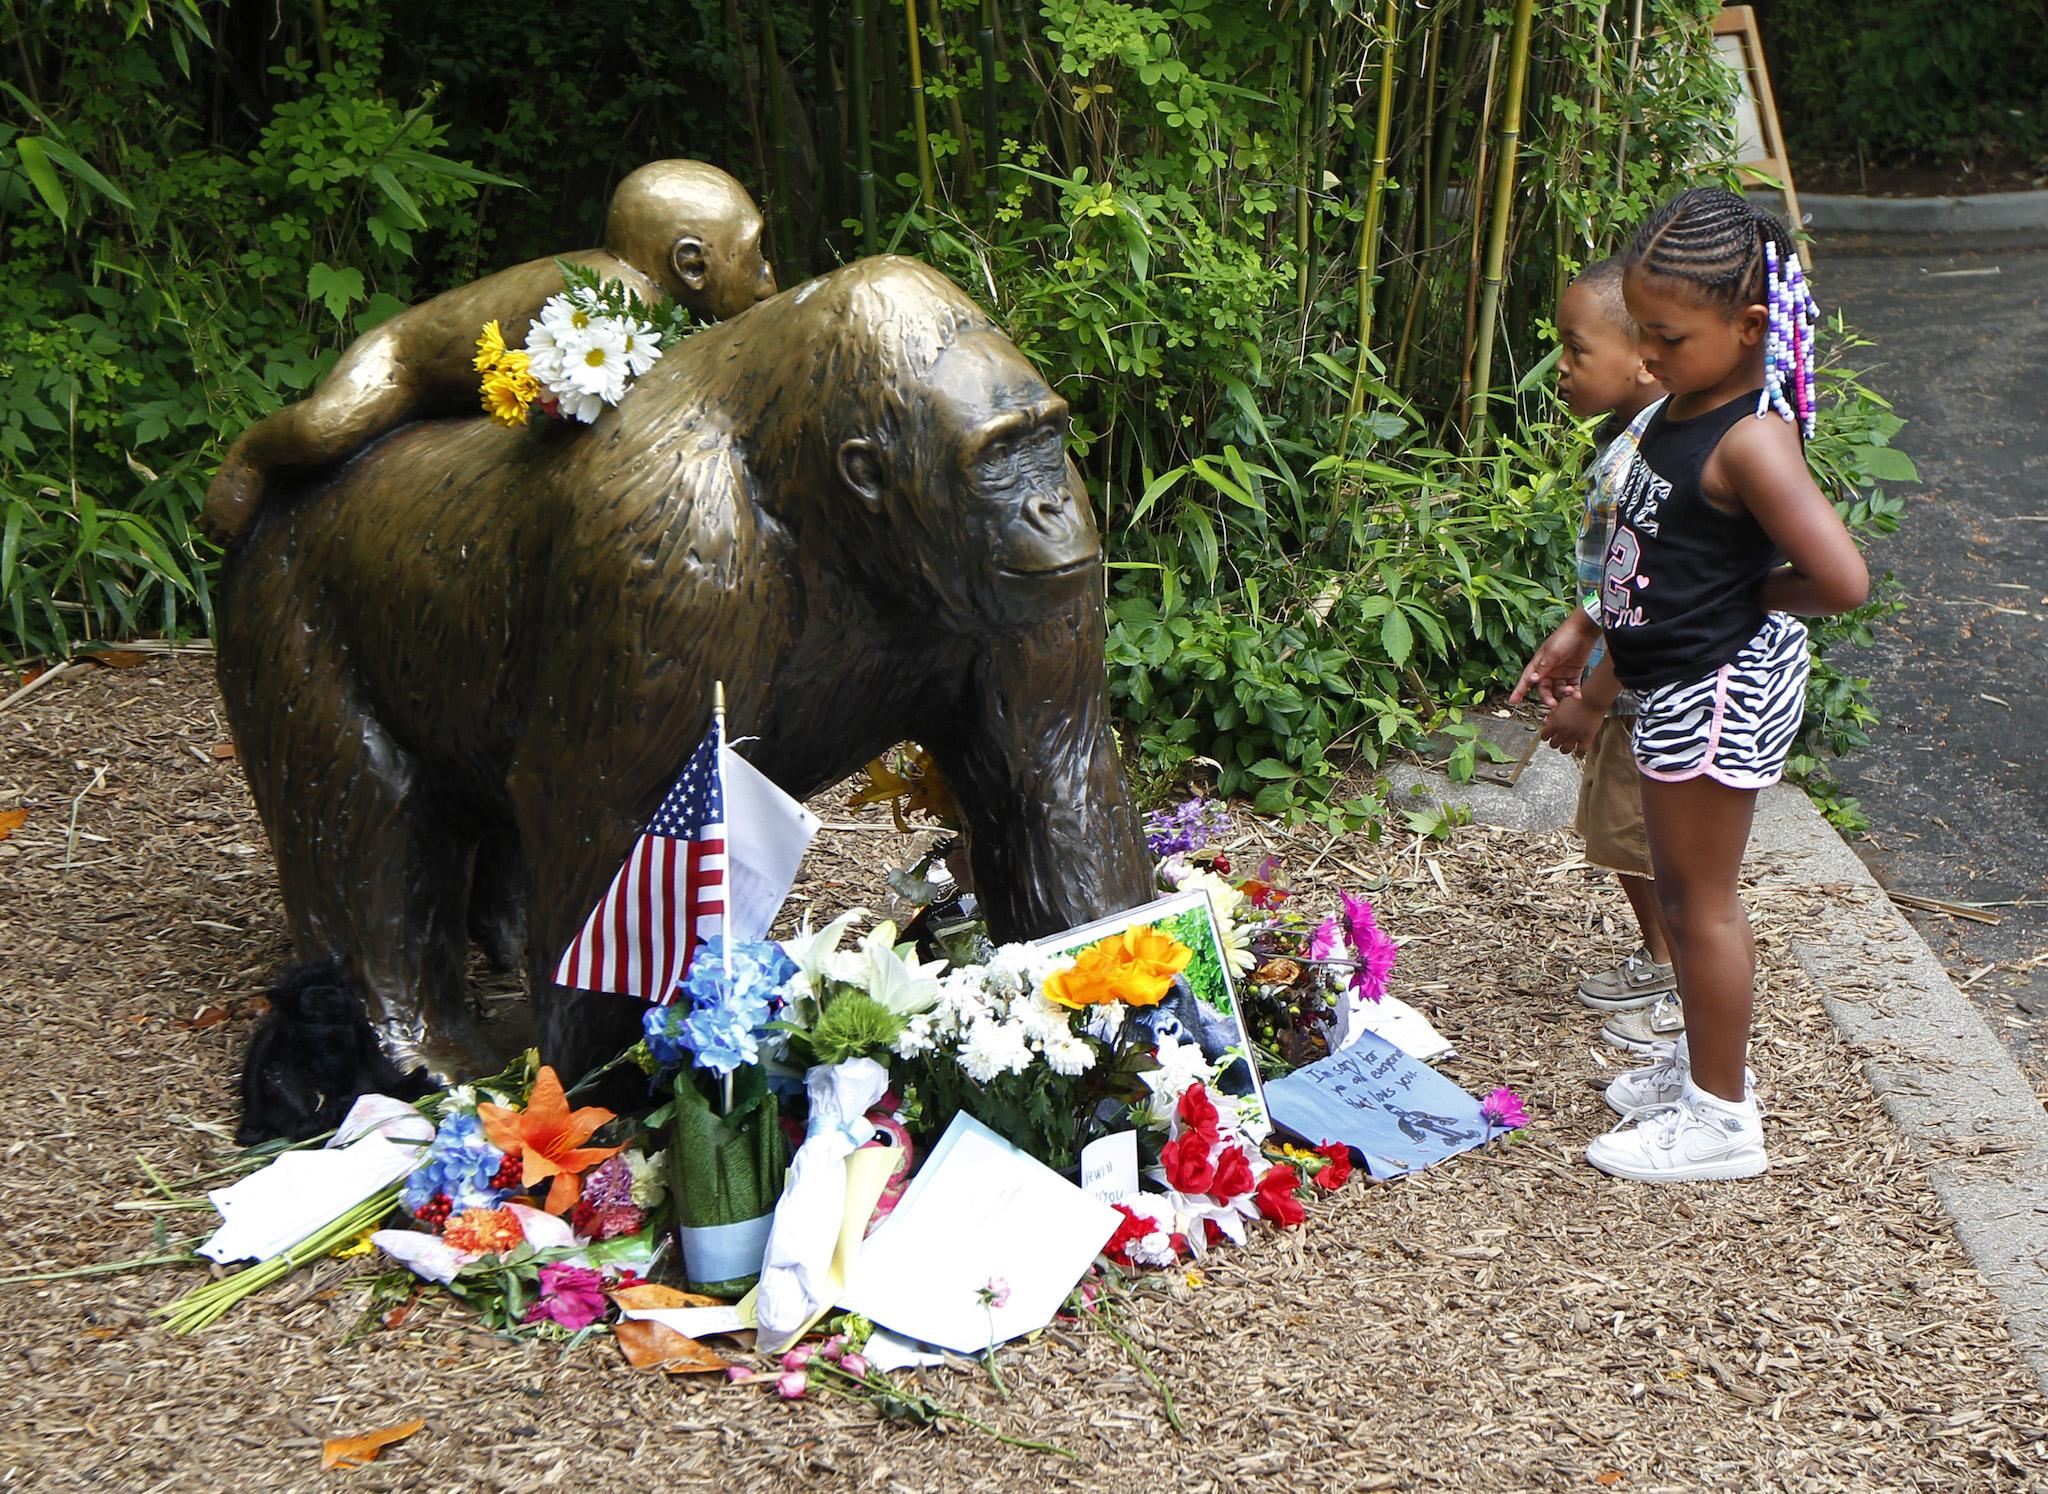 Visitors pay tribute to the gorilla who officials were forced to kill after a three-year-old boy fell into his enclosure